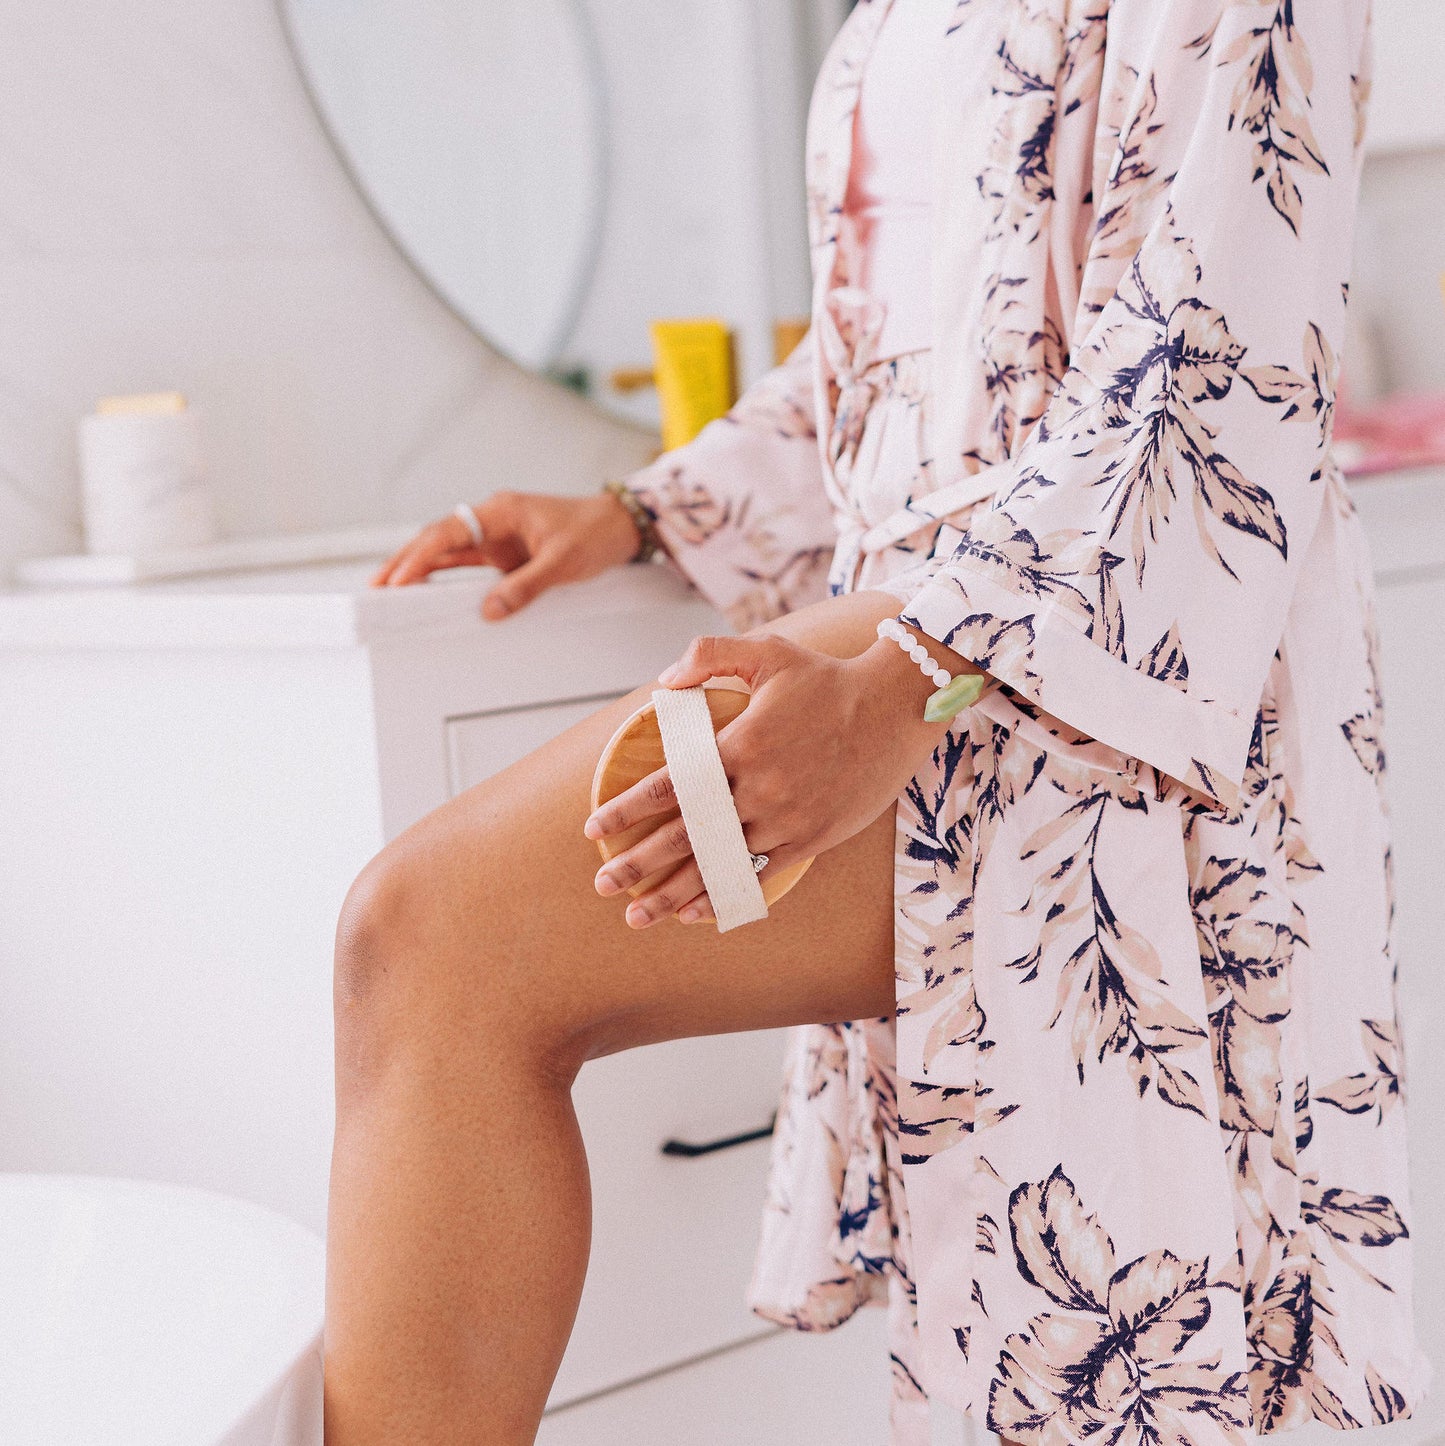 woman wearing pink floral bathrobe massaging thigh with natural boar's hair body brush for exfoliation and lymphatic drainage